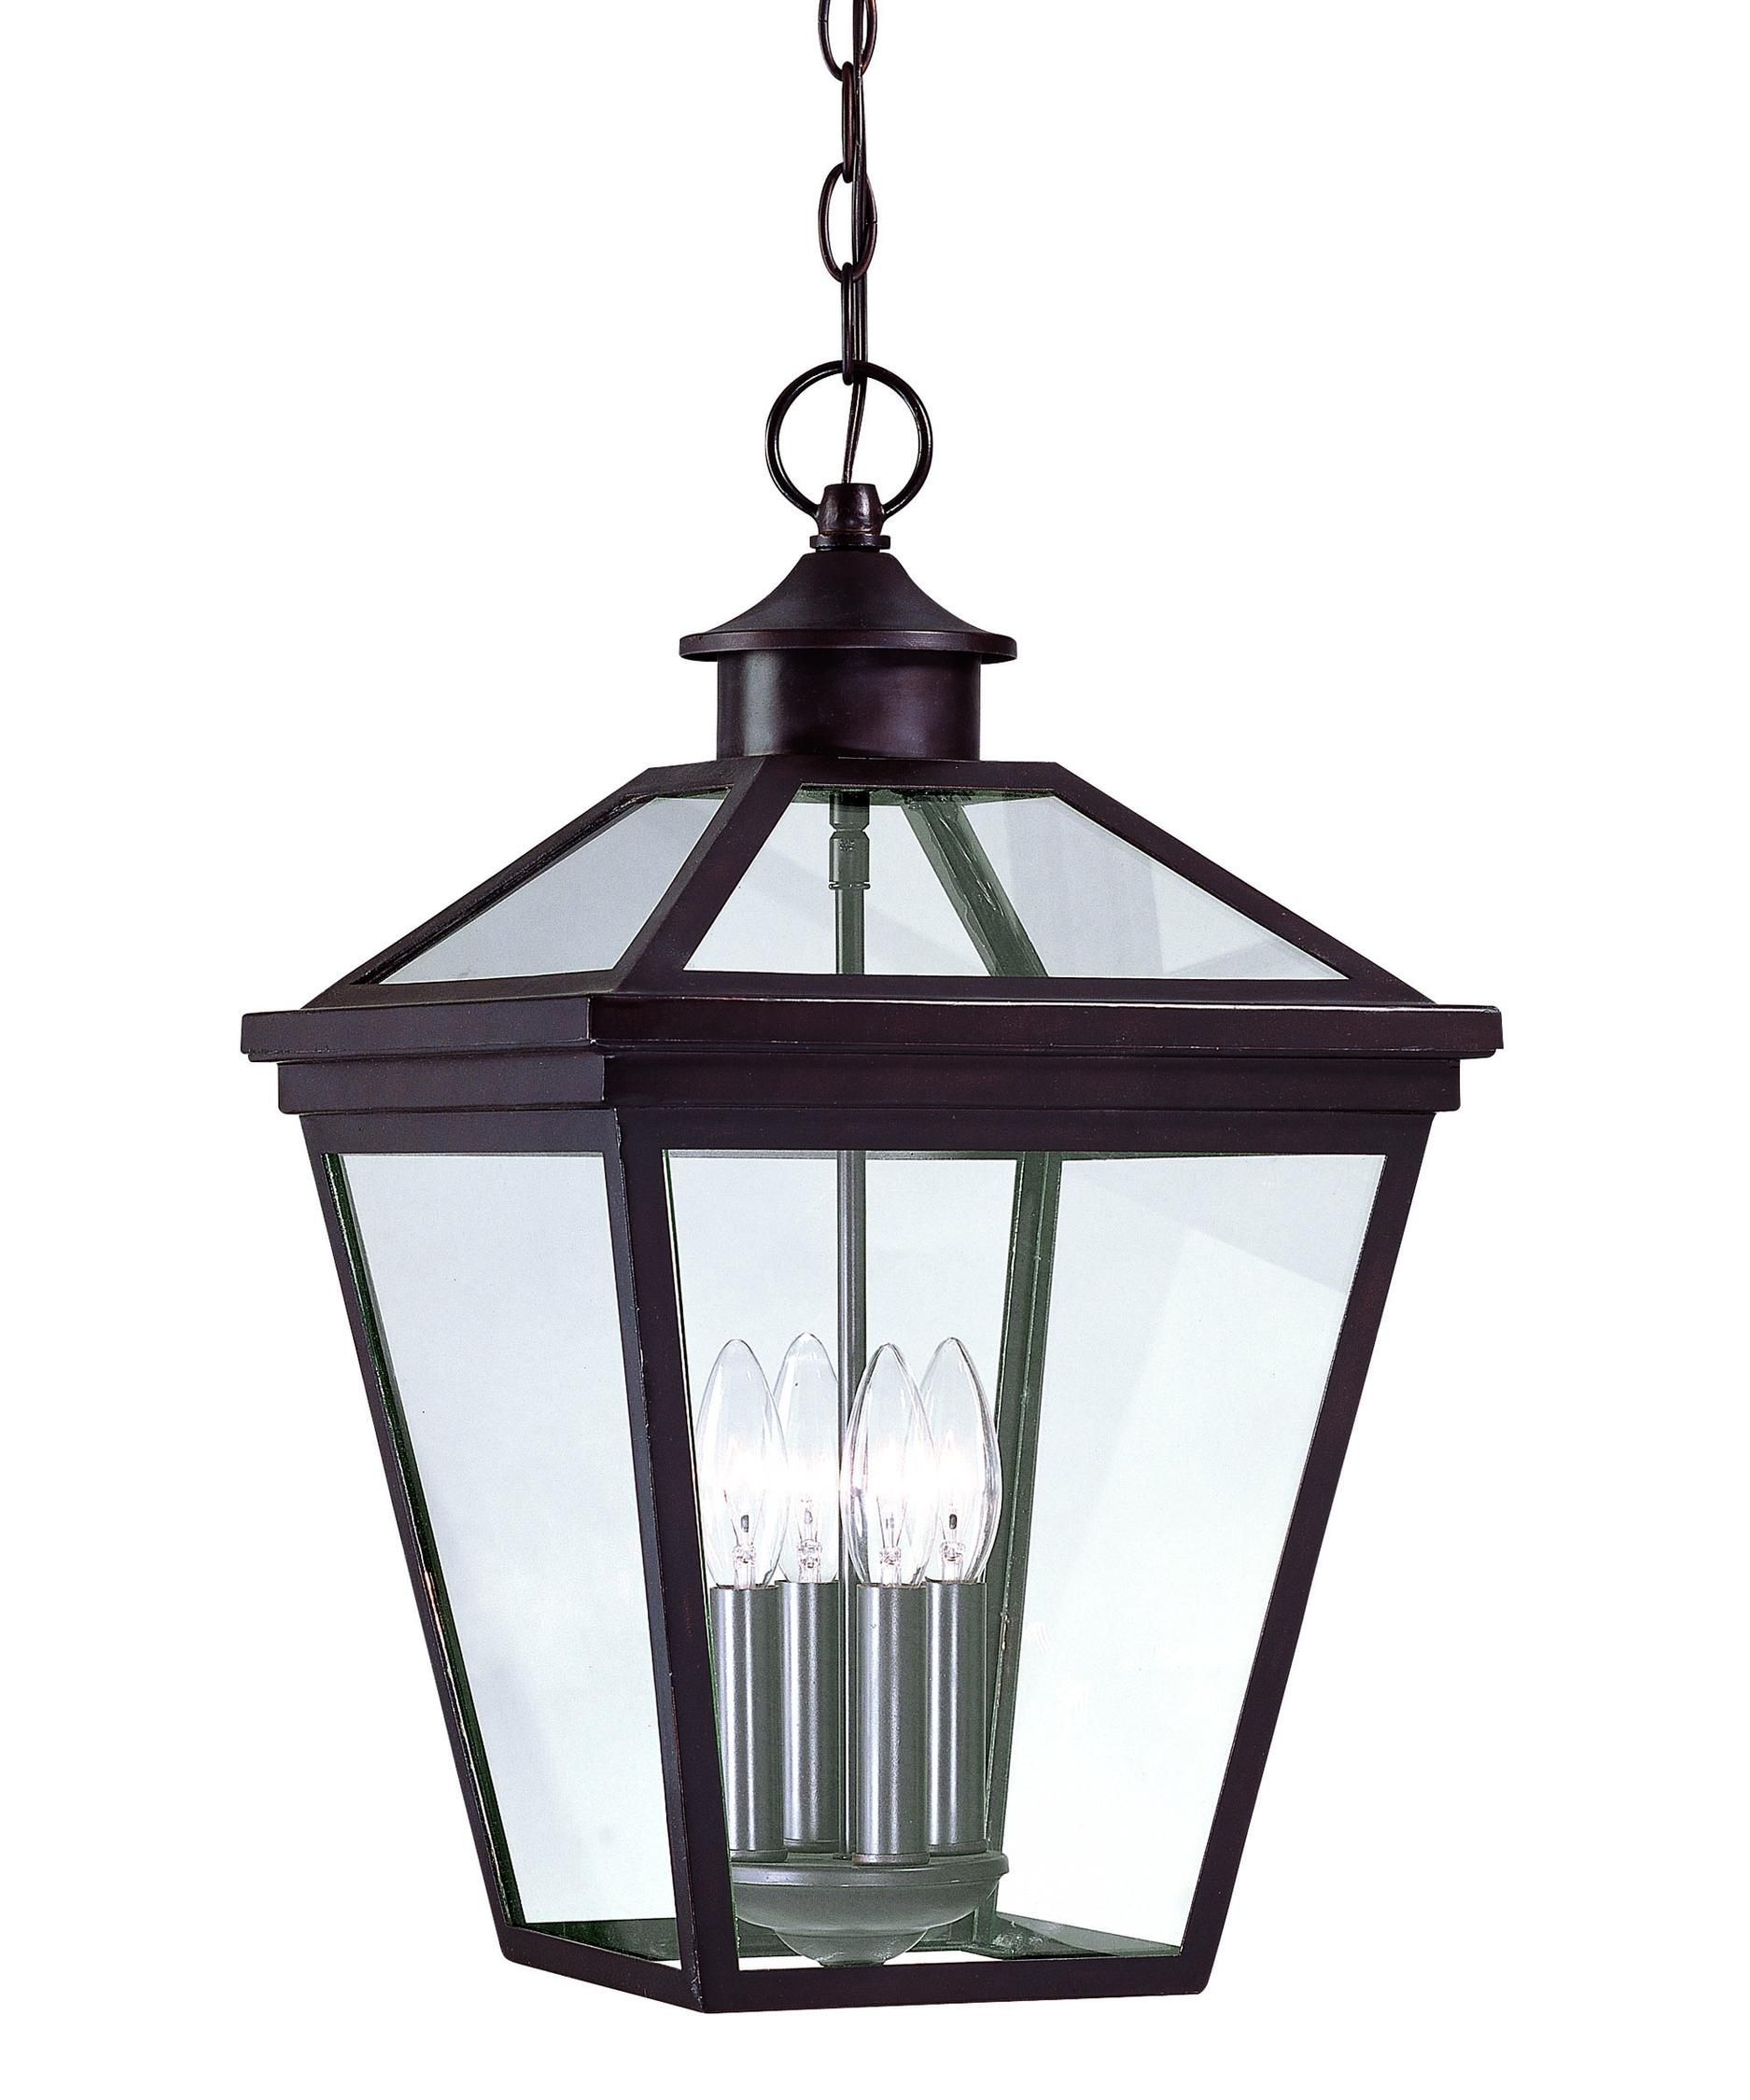 Savoy House Ellijay 4 Light Outdoor Hanging Lantern | Capitol In Traditional Outdoor Hanging Lights (View 13 of 15)